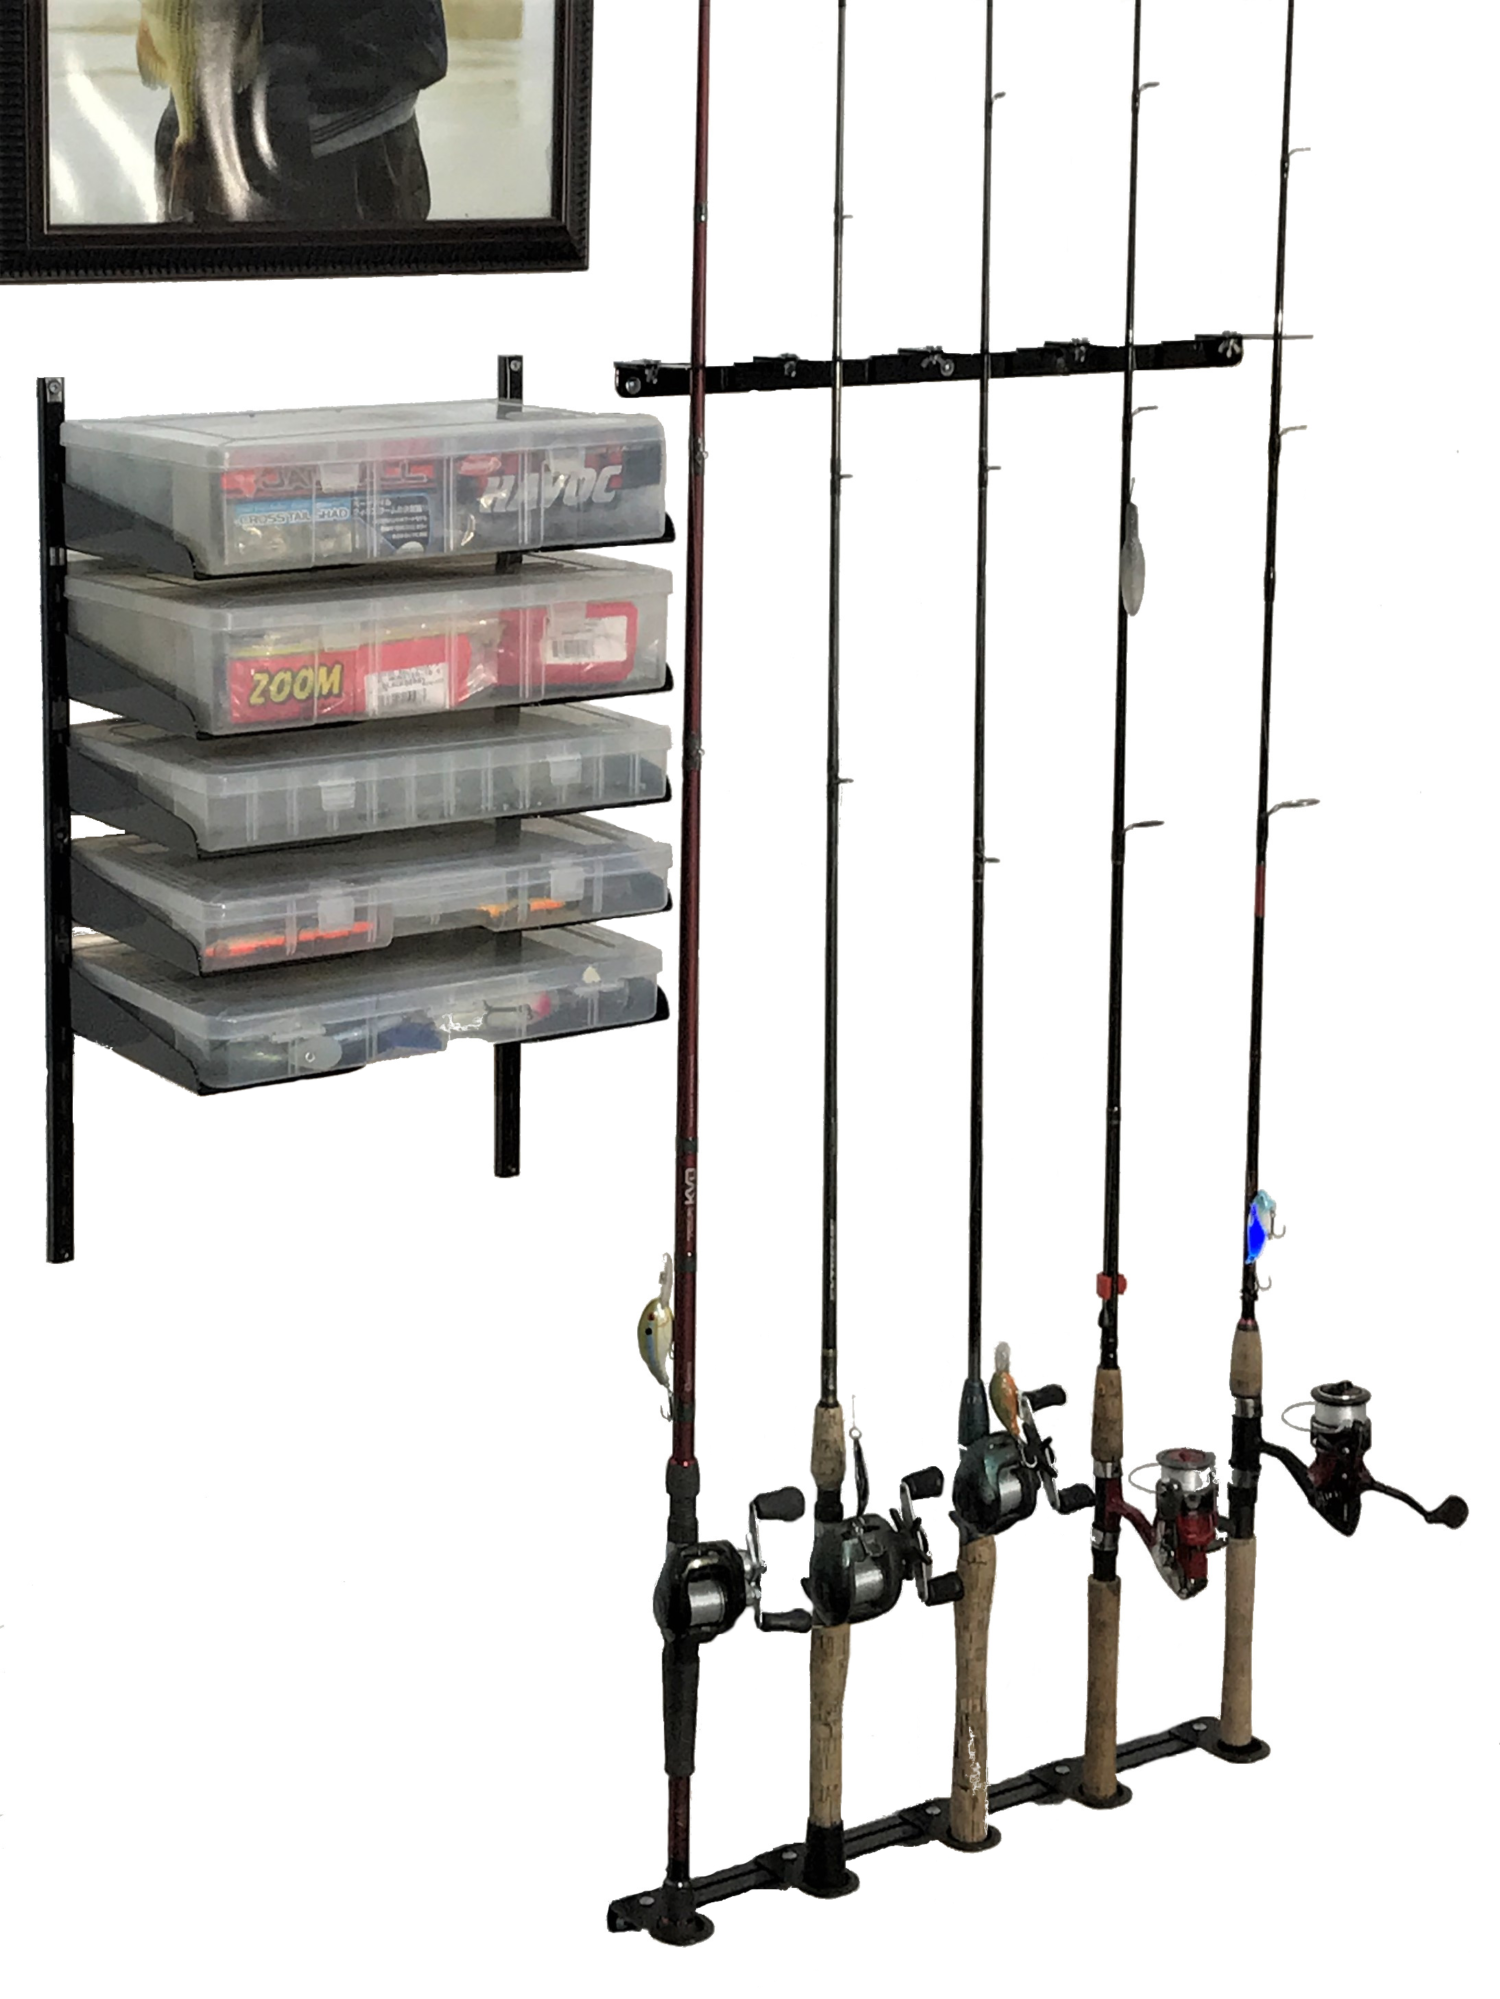 1/2 KIT – Rod/Reel Holder with Tackle Trays (One Rod & Reel Holder